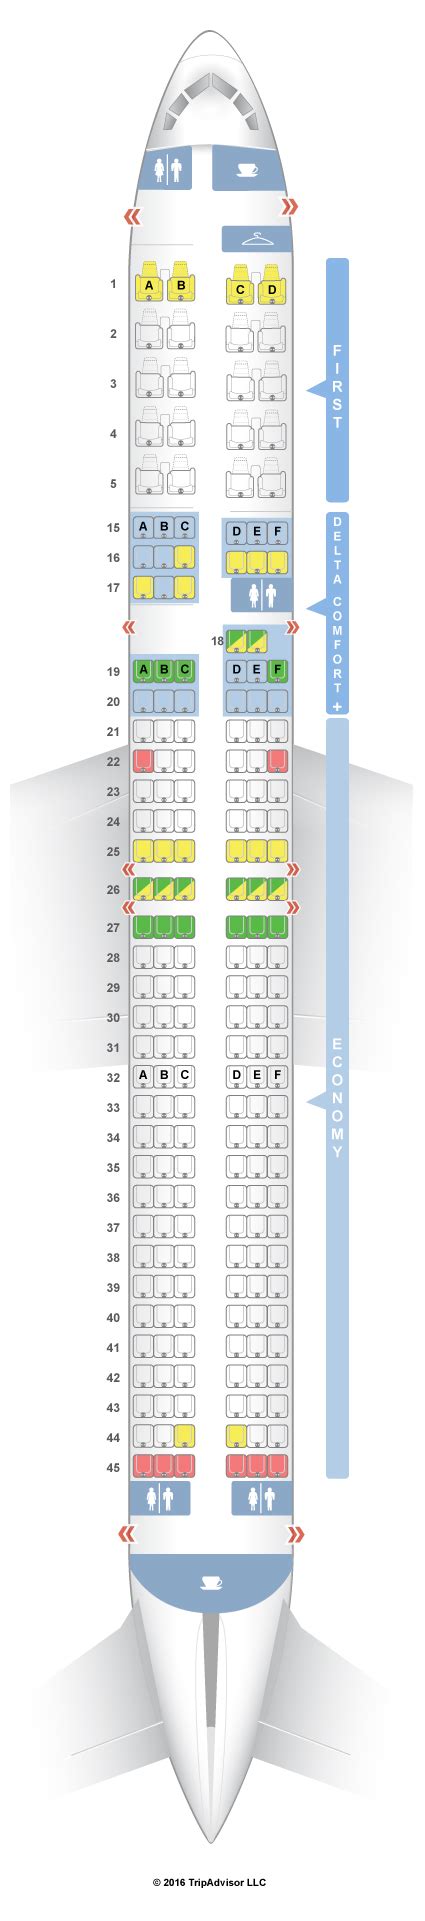 Seatguru 757 delta. For your next Delta flight, use this seating chart to get the most comfortable seats, legroom, ... Boeing 757-200 (757) Boeing 757-200 (75D) Boeing 757-200 (75G) Boeing 757-200 (75P) ... SeatGuru was created to help travelers choose the best seats and in-flight amenities. Forum; Mobile; FAQ; Contact Us; 